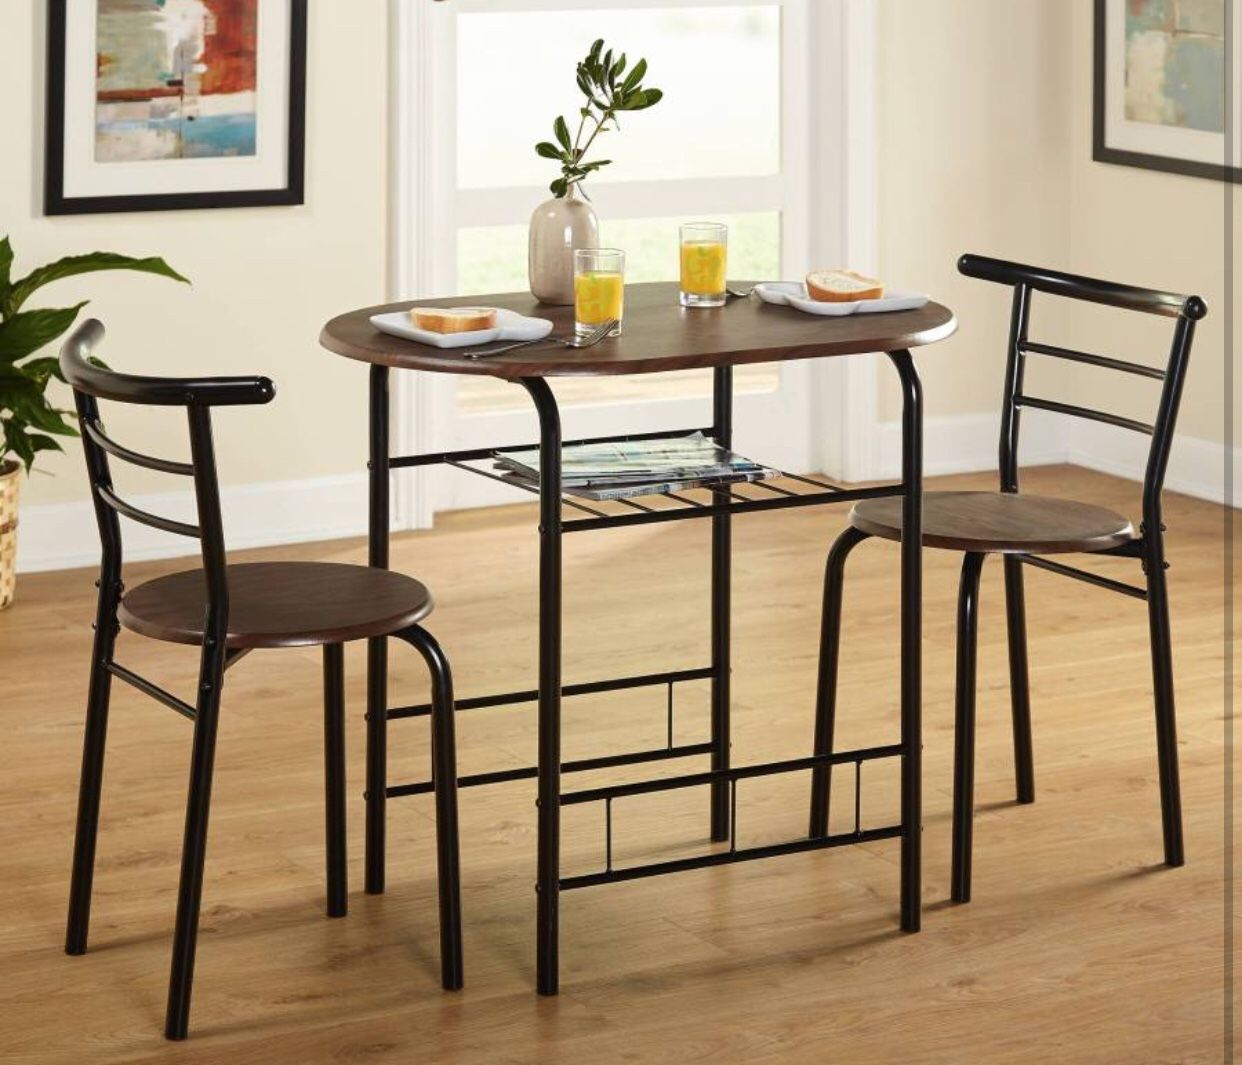 Bistro set / apartment kitchen set table with 2 chairs - NEW